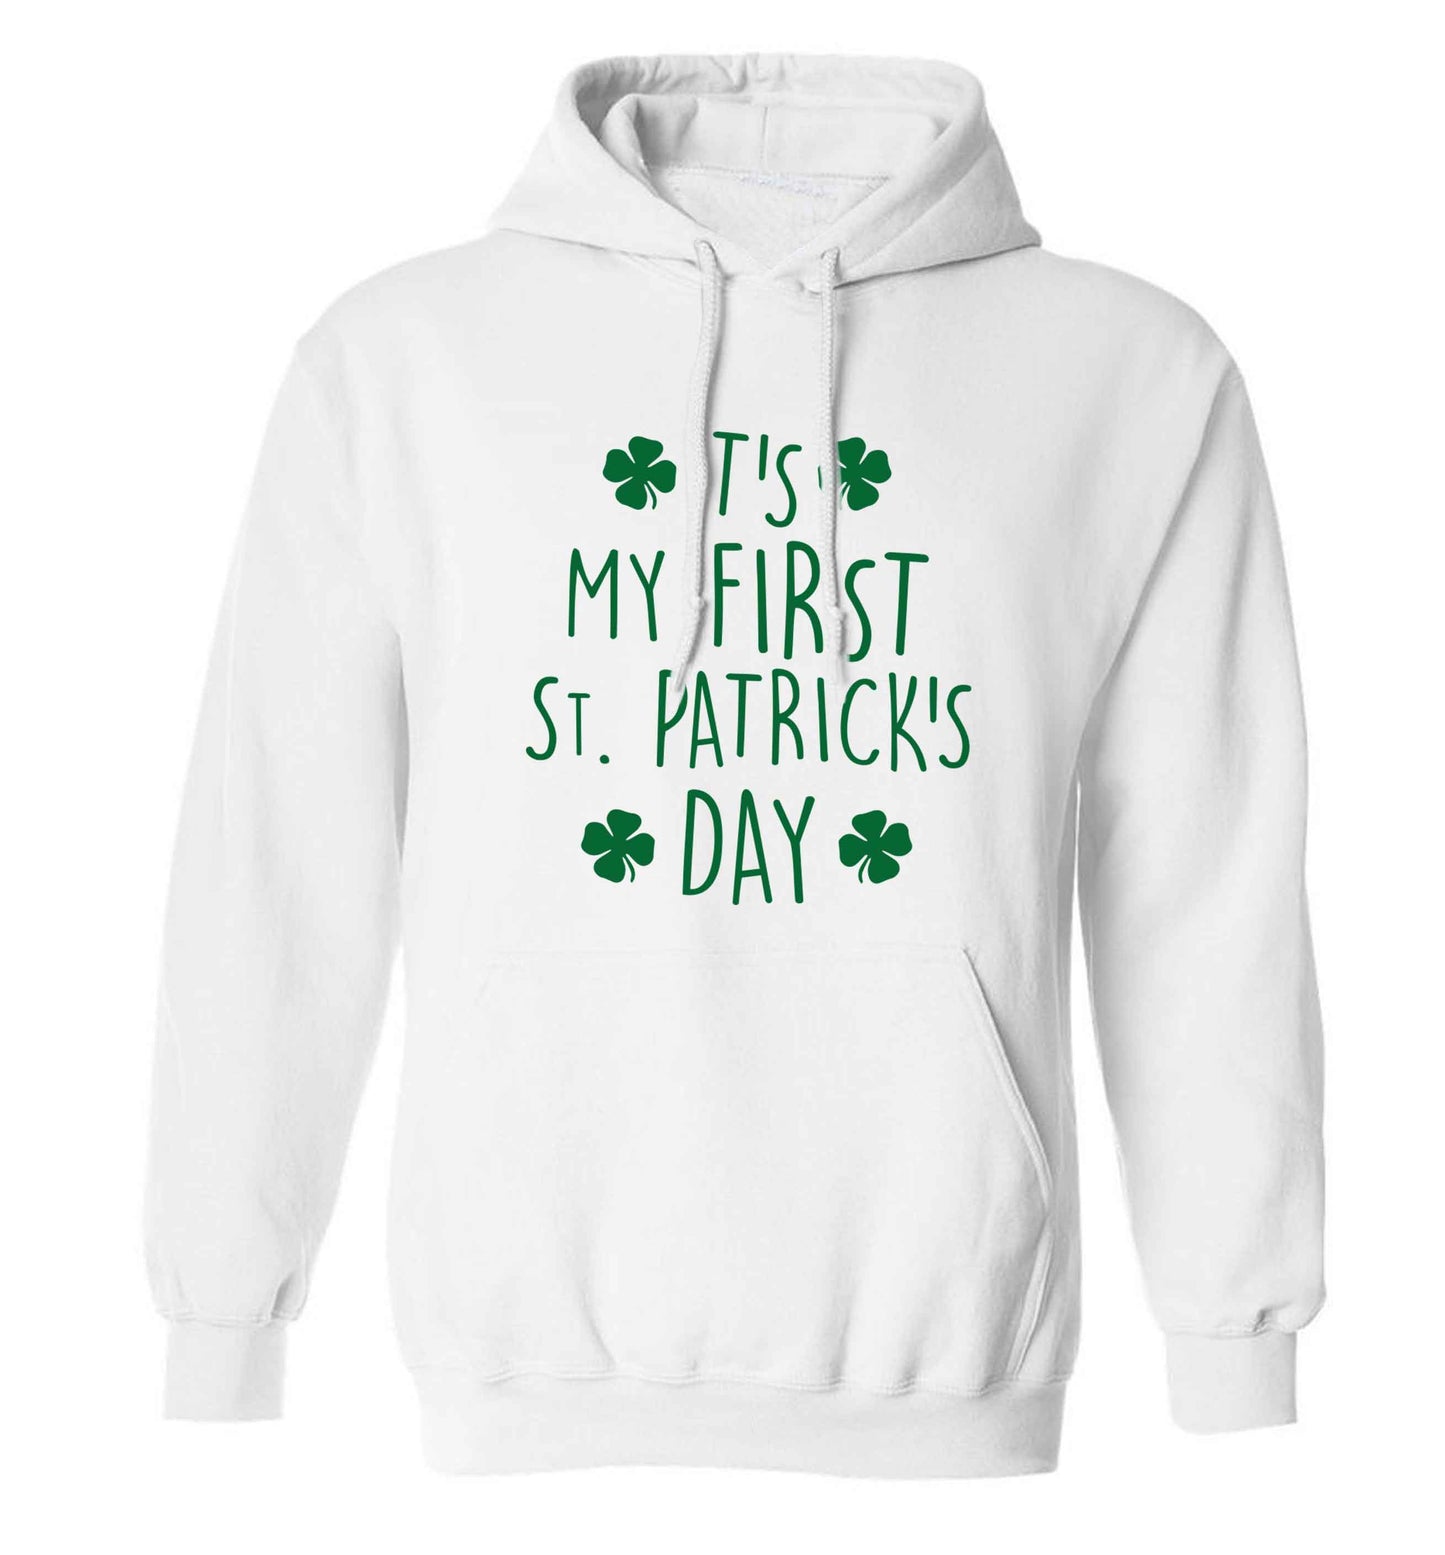 It's my first St.Patrick's day adults unisex white hoodie 2XL